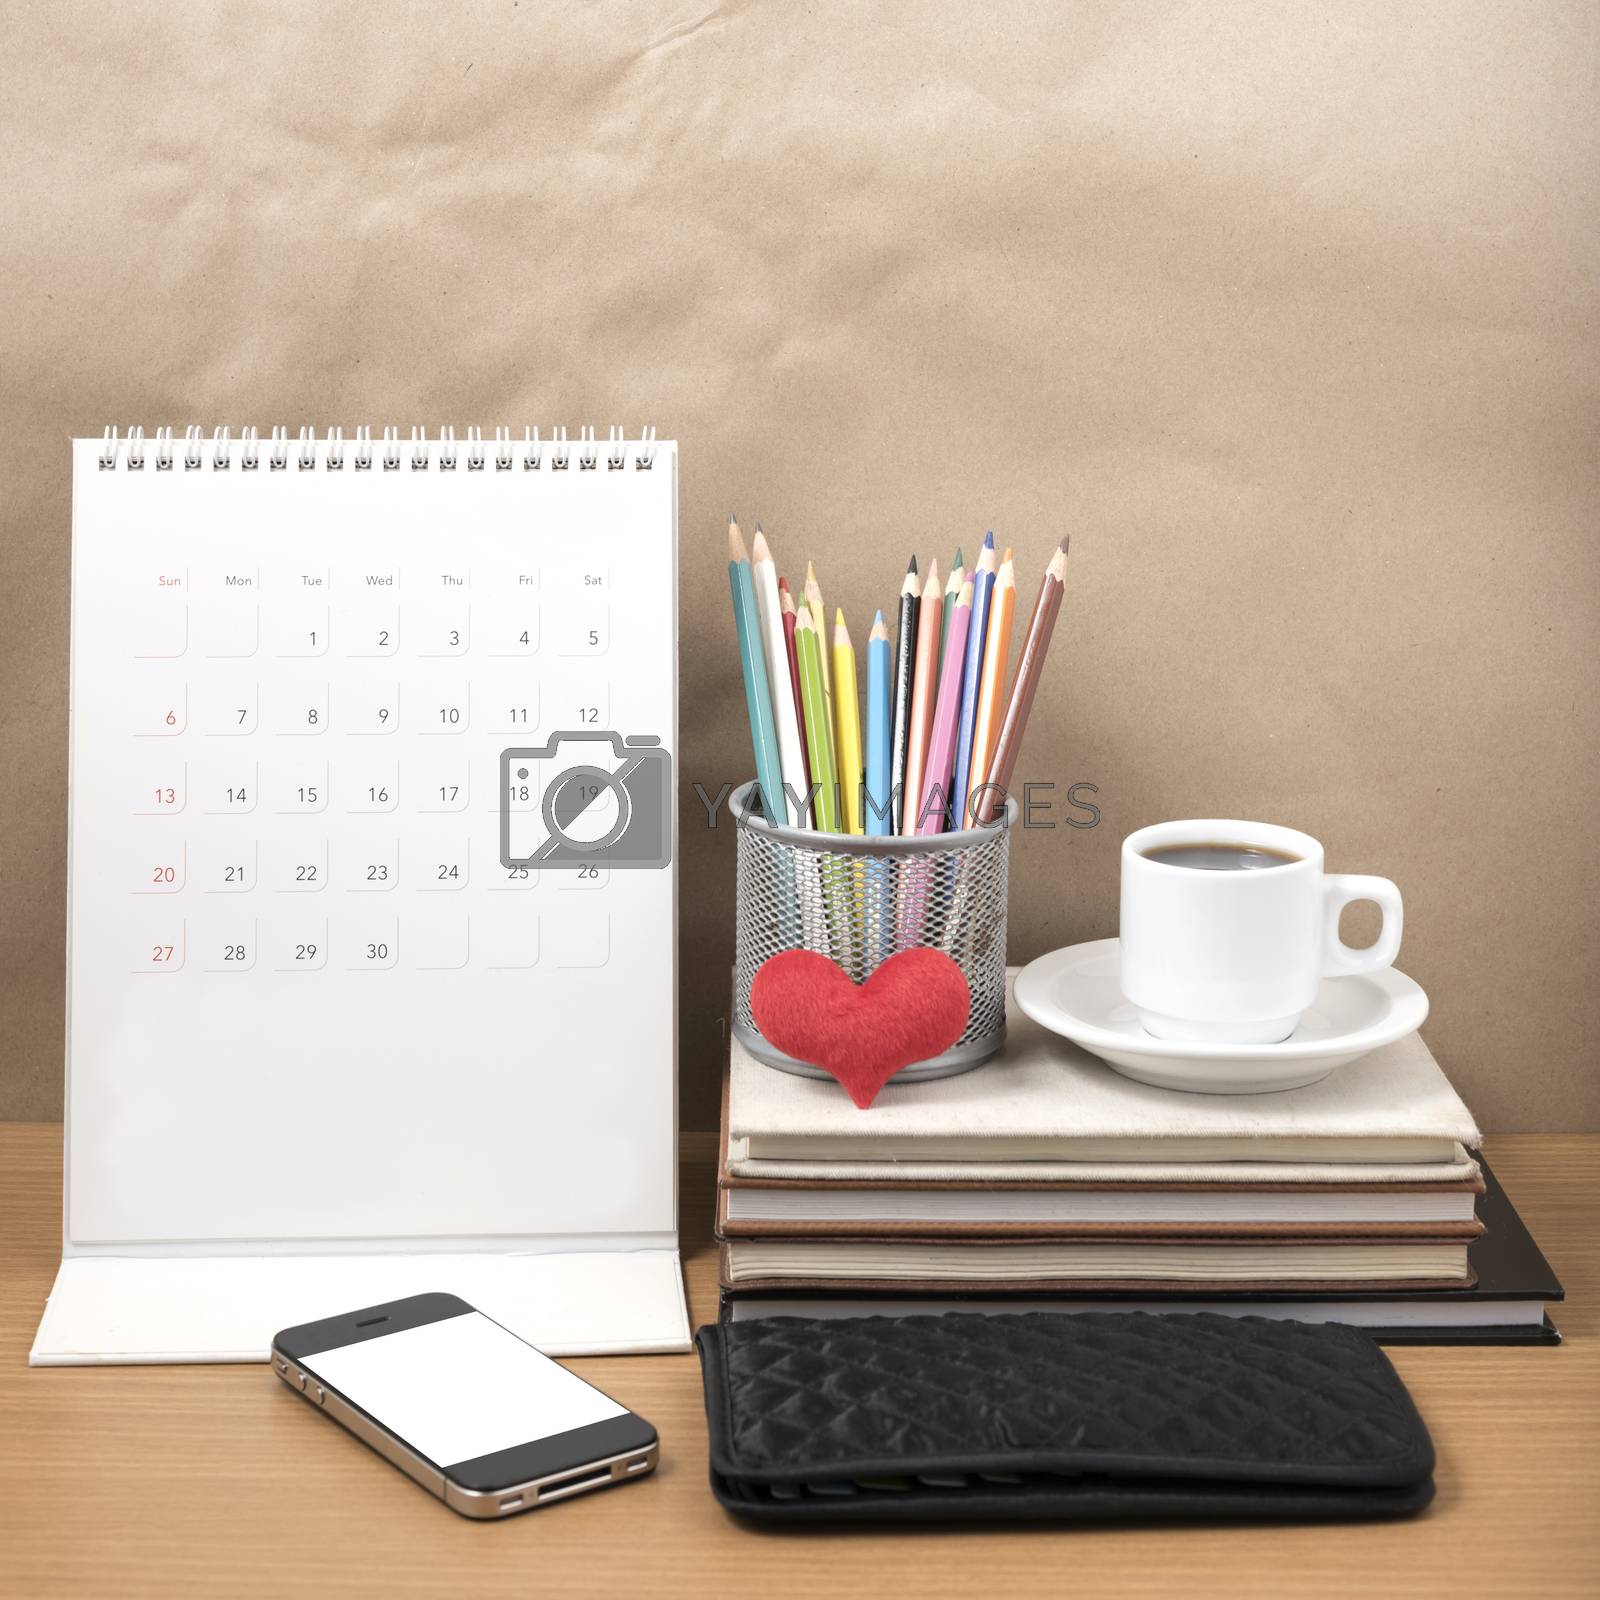 Royalty free image of office desk : coffee with phone,wallet,calendar,heart,color penc by ammza12